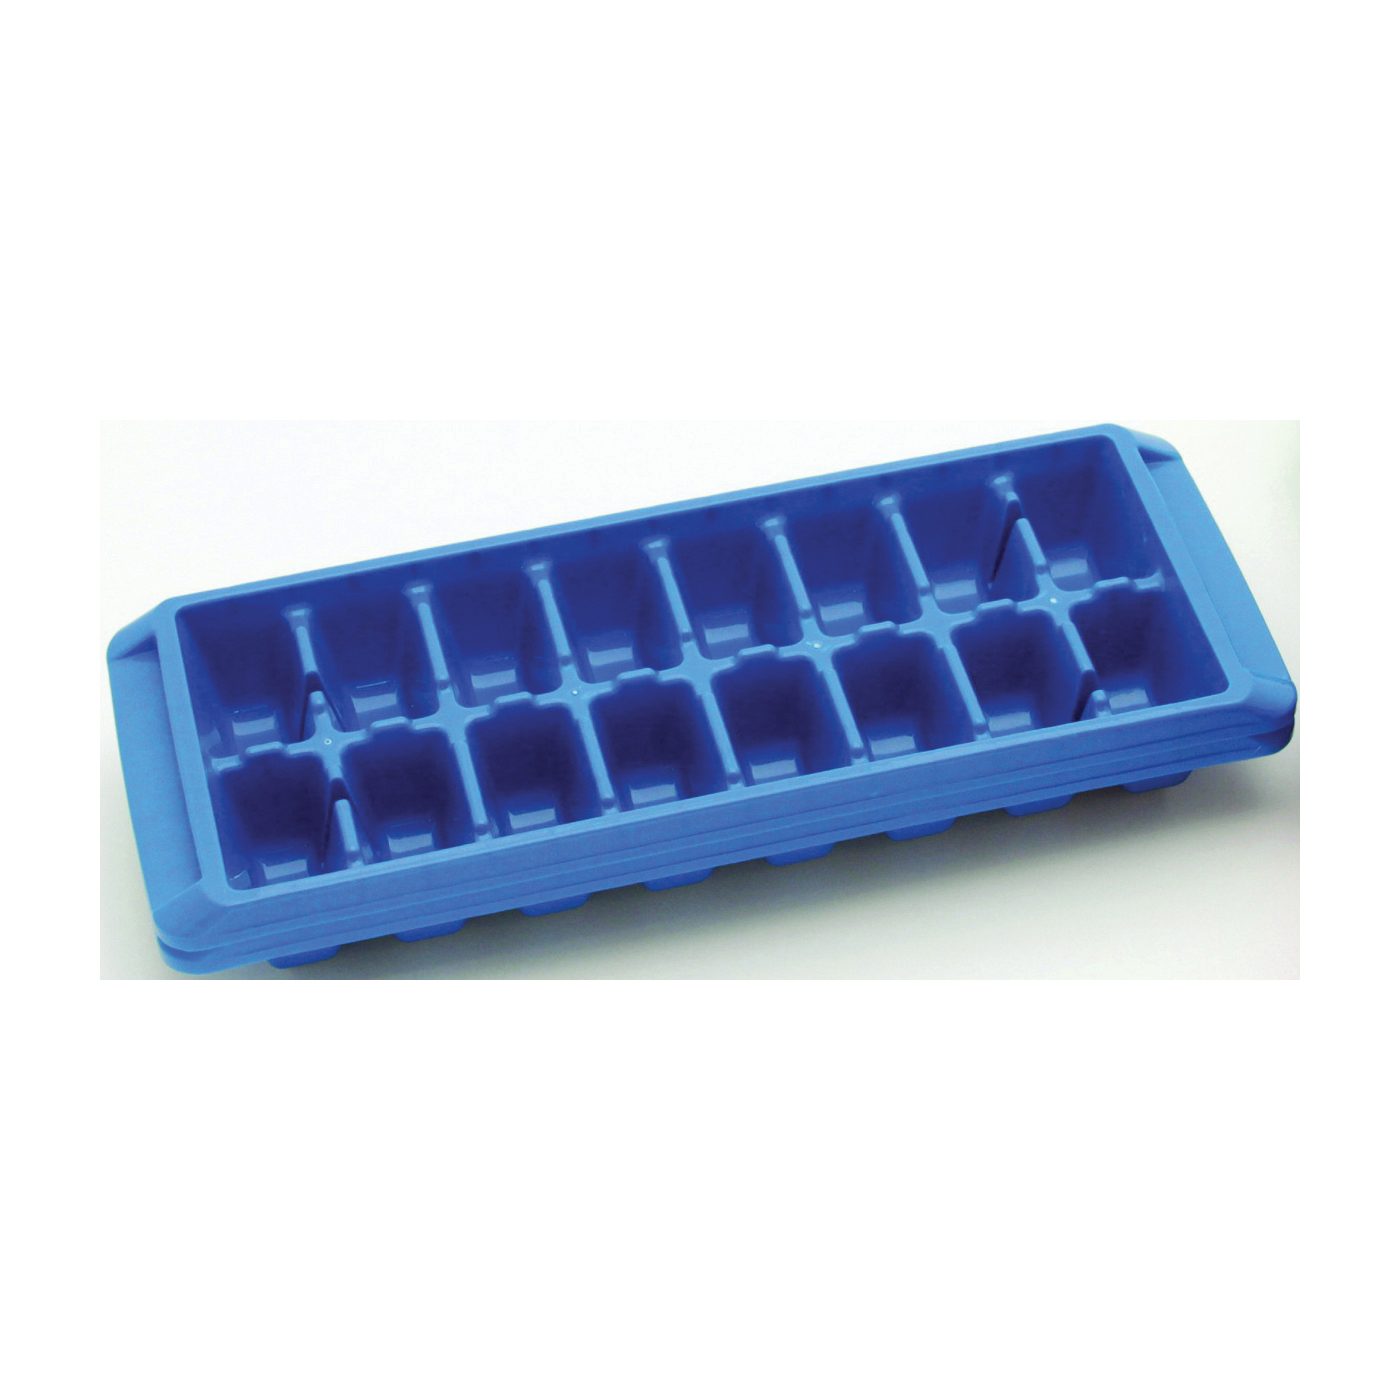 Chef Craft 21846 Ice Cube Tray, 16-Compartment, Assorted, Dishwasher Safe: Yes